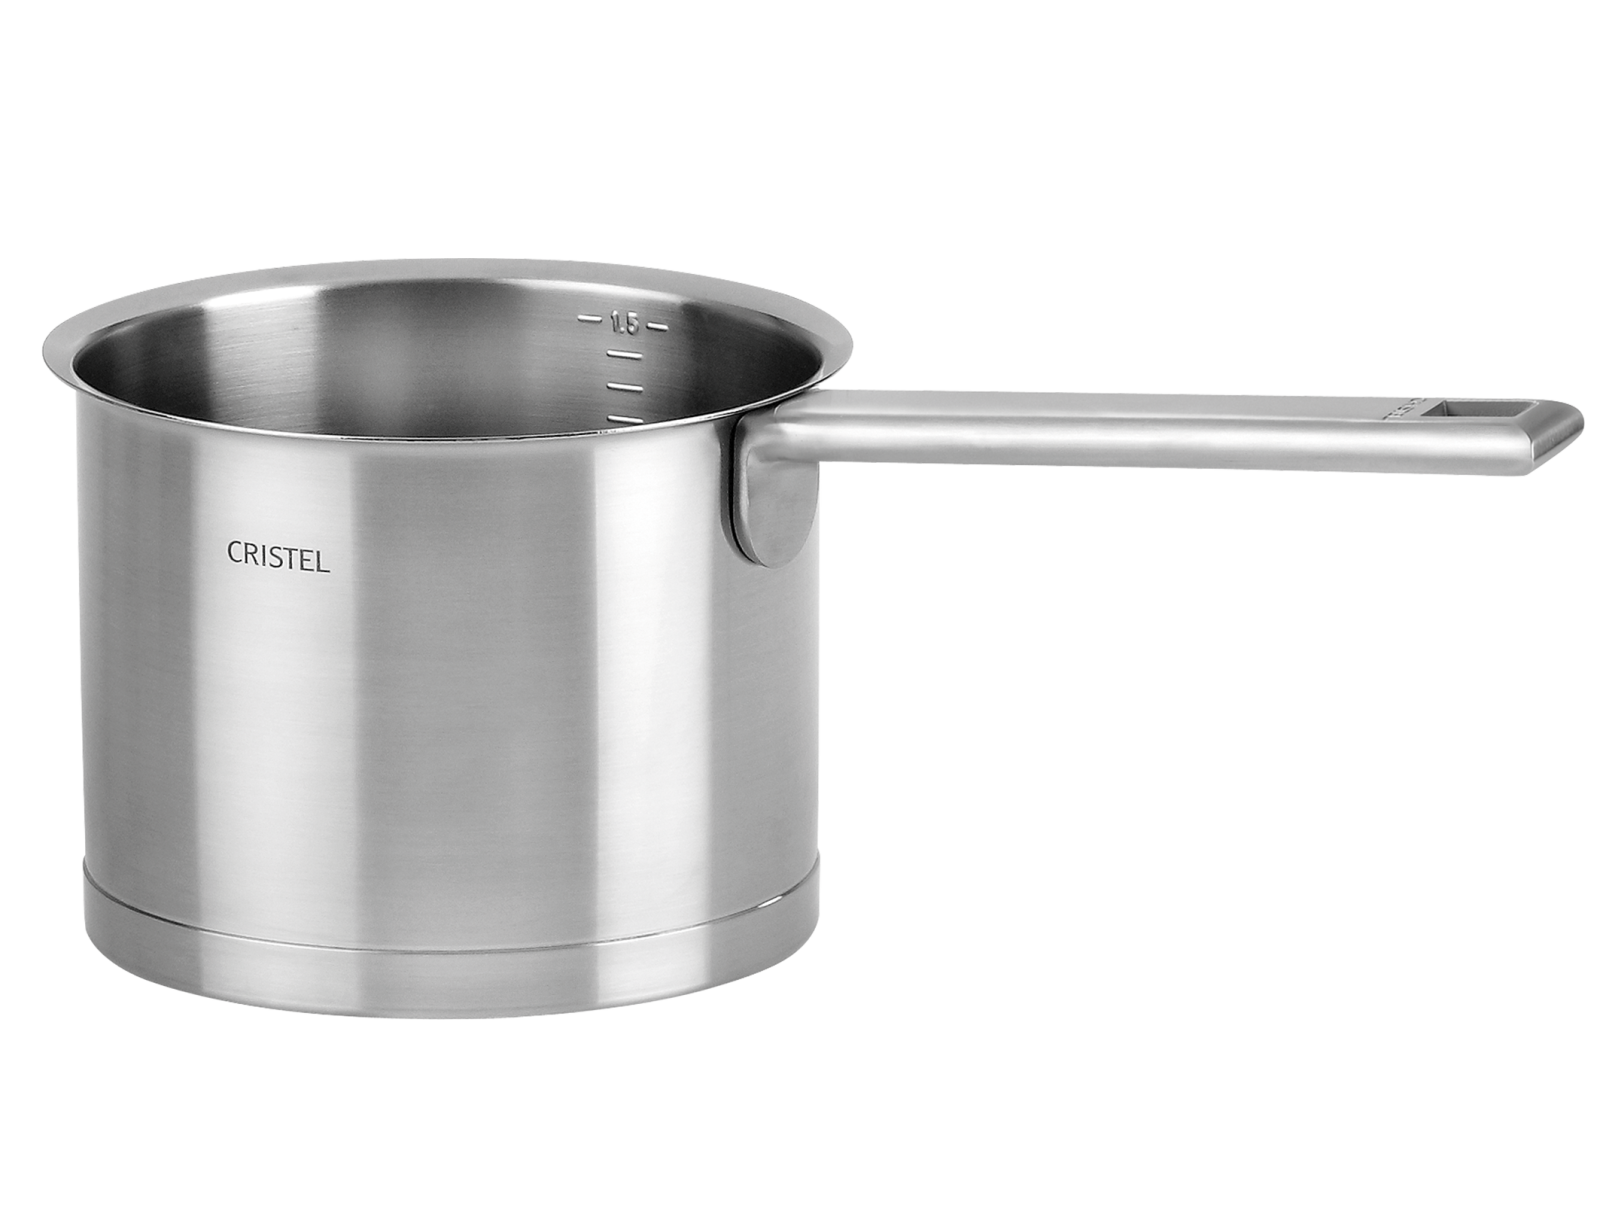 / Strate Collection Stainless Steel 12 cm Cristel/  / Stainless Steel Saucepan with Detachable Handle/ 